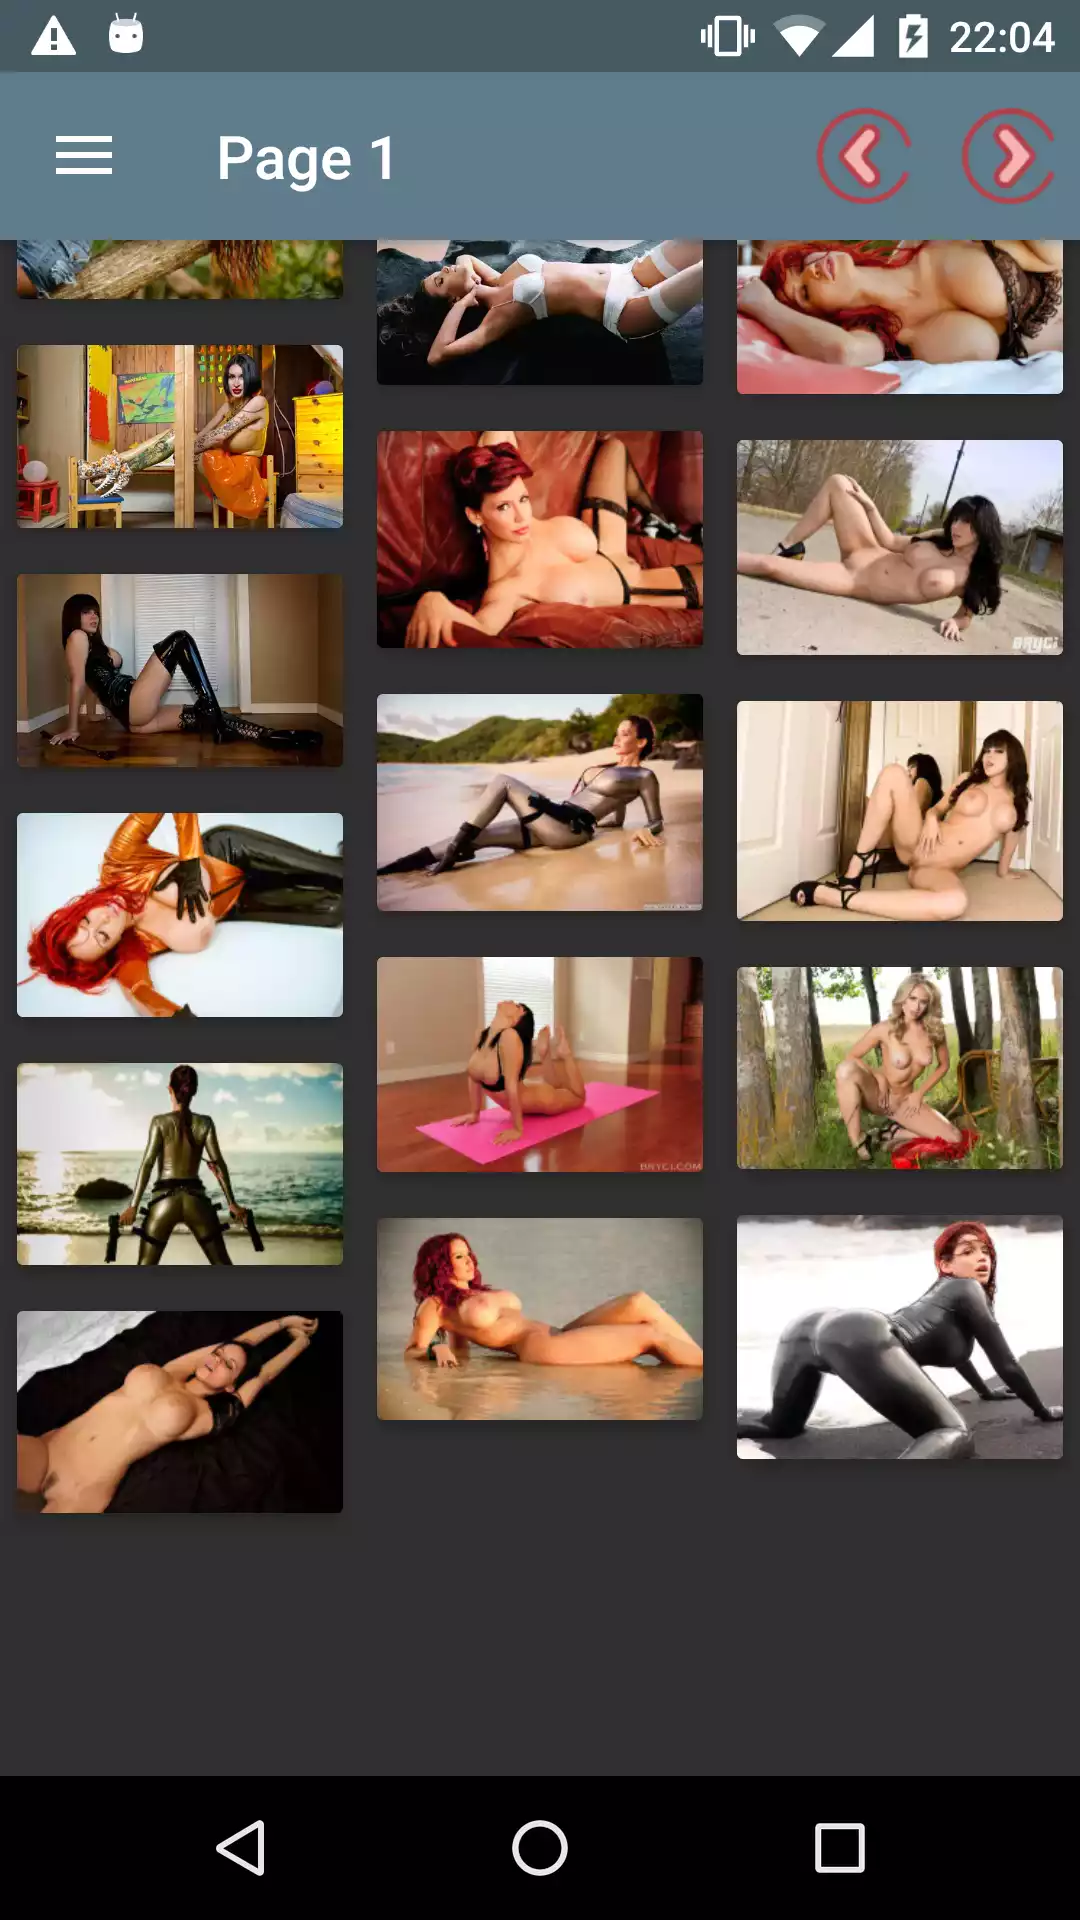 Hot Canadian Walls henati,pornstar,pics,sexy,apk,for,porn,hot,free,daily,pictures,pic,photos,app,apps,wallpapers,phone,download,hentai,photo,bisexpics,best